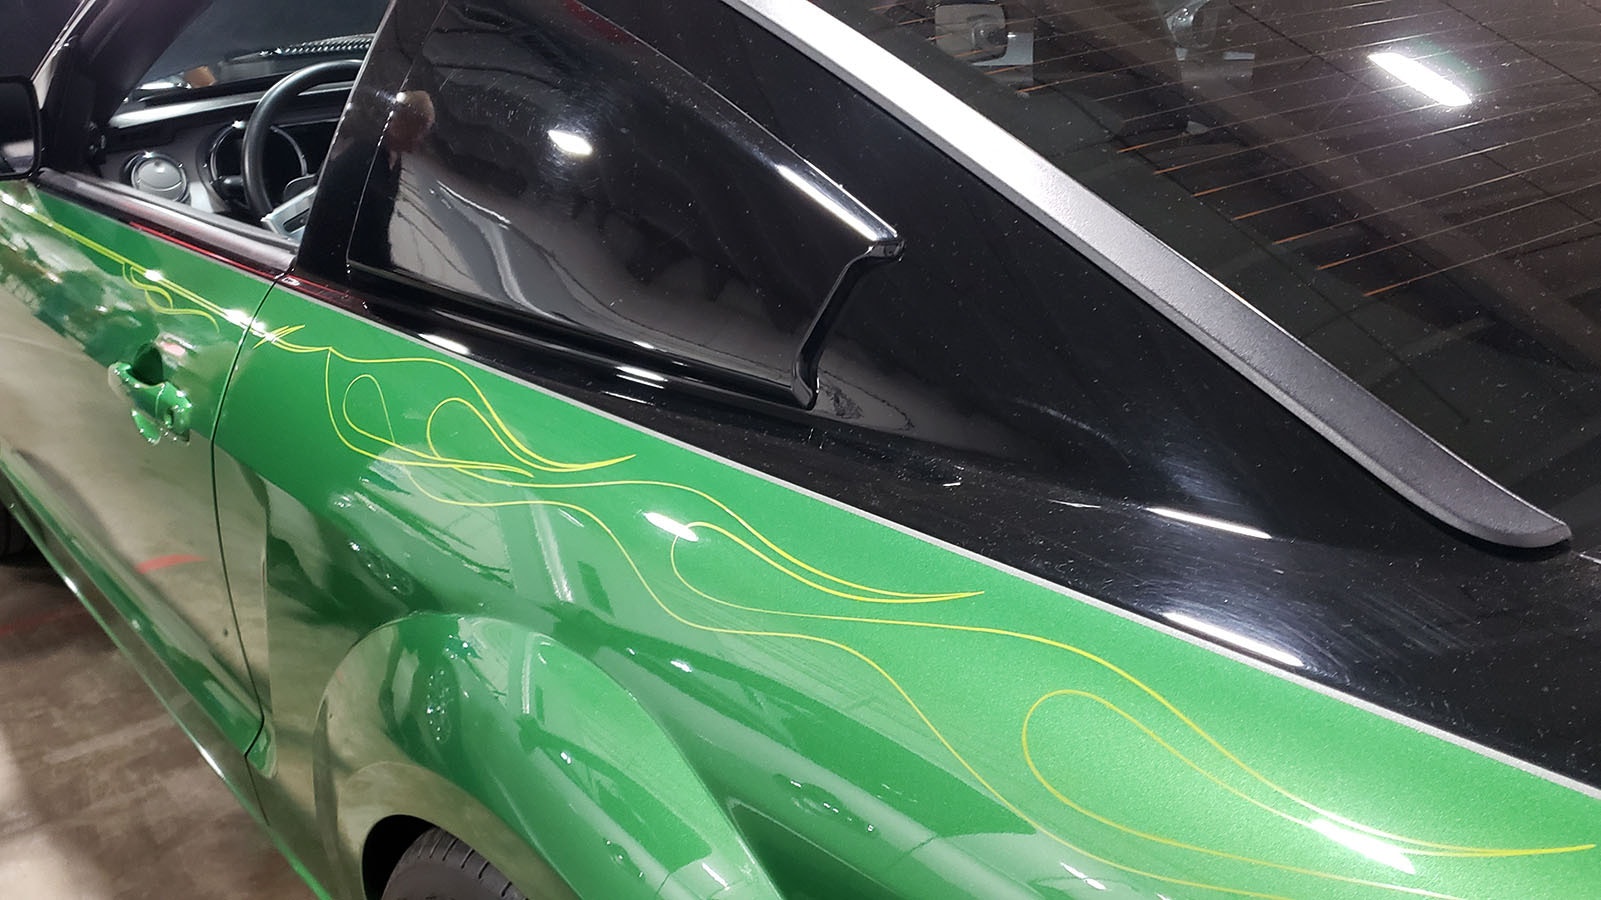 Brenda Treuthardt added old-time pin striping to the car she calls Sins of Envy.